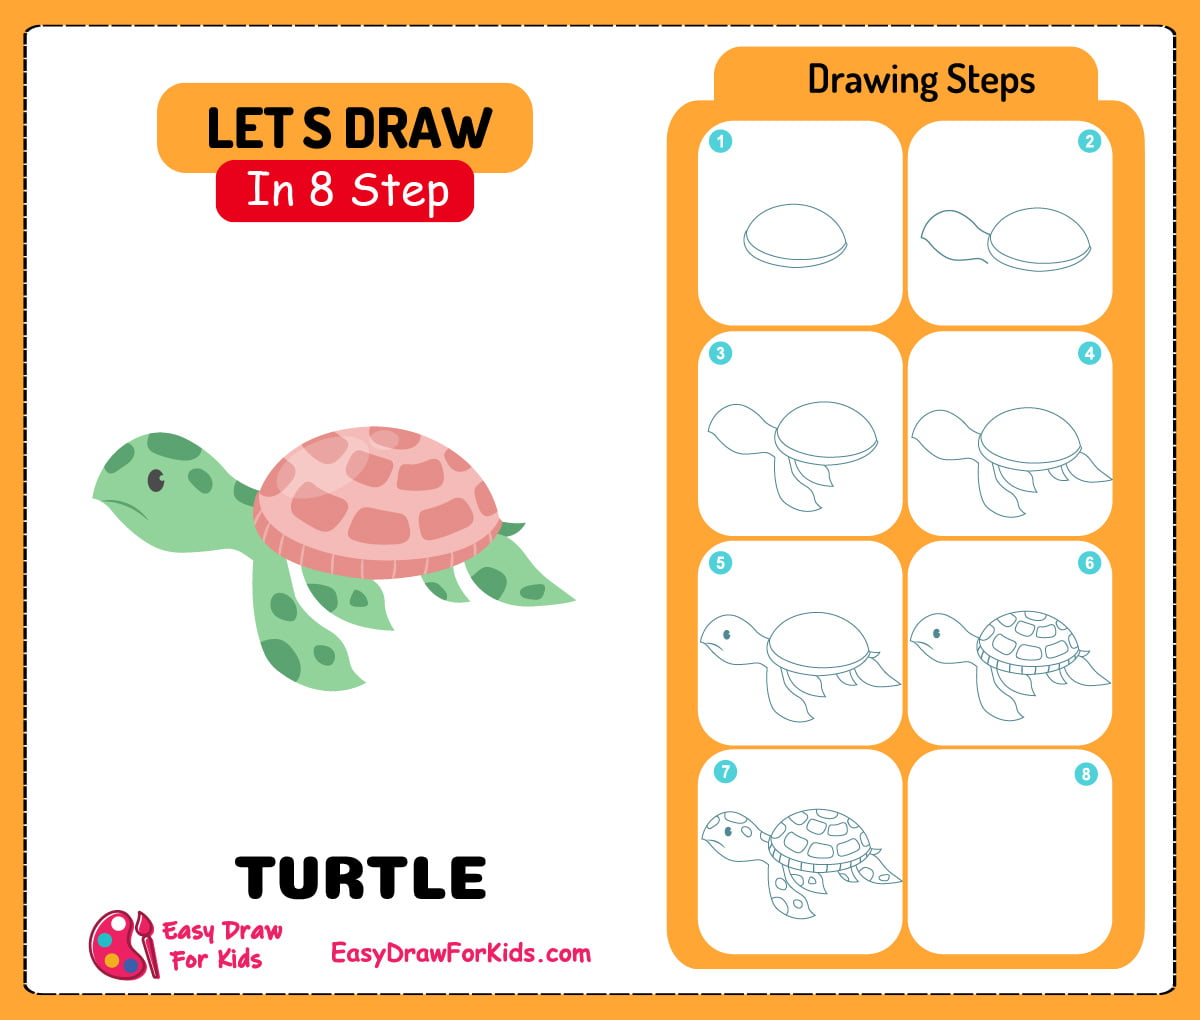 How To Draw A Turtle Step By Step